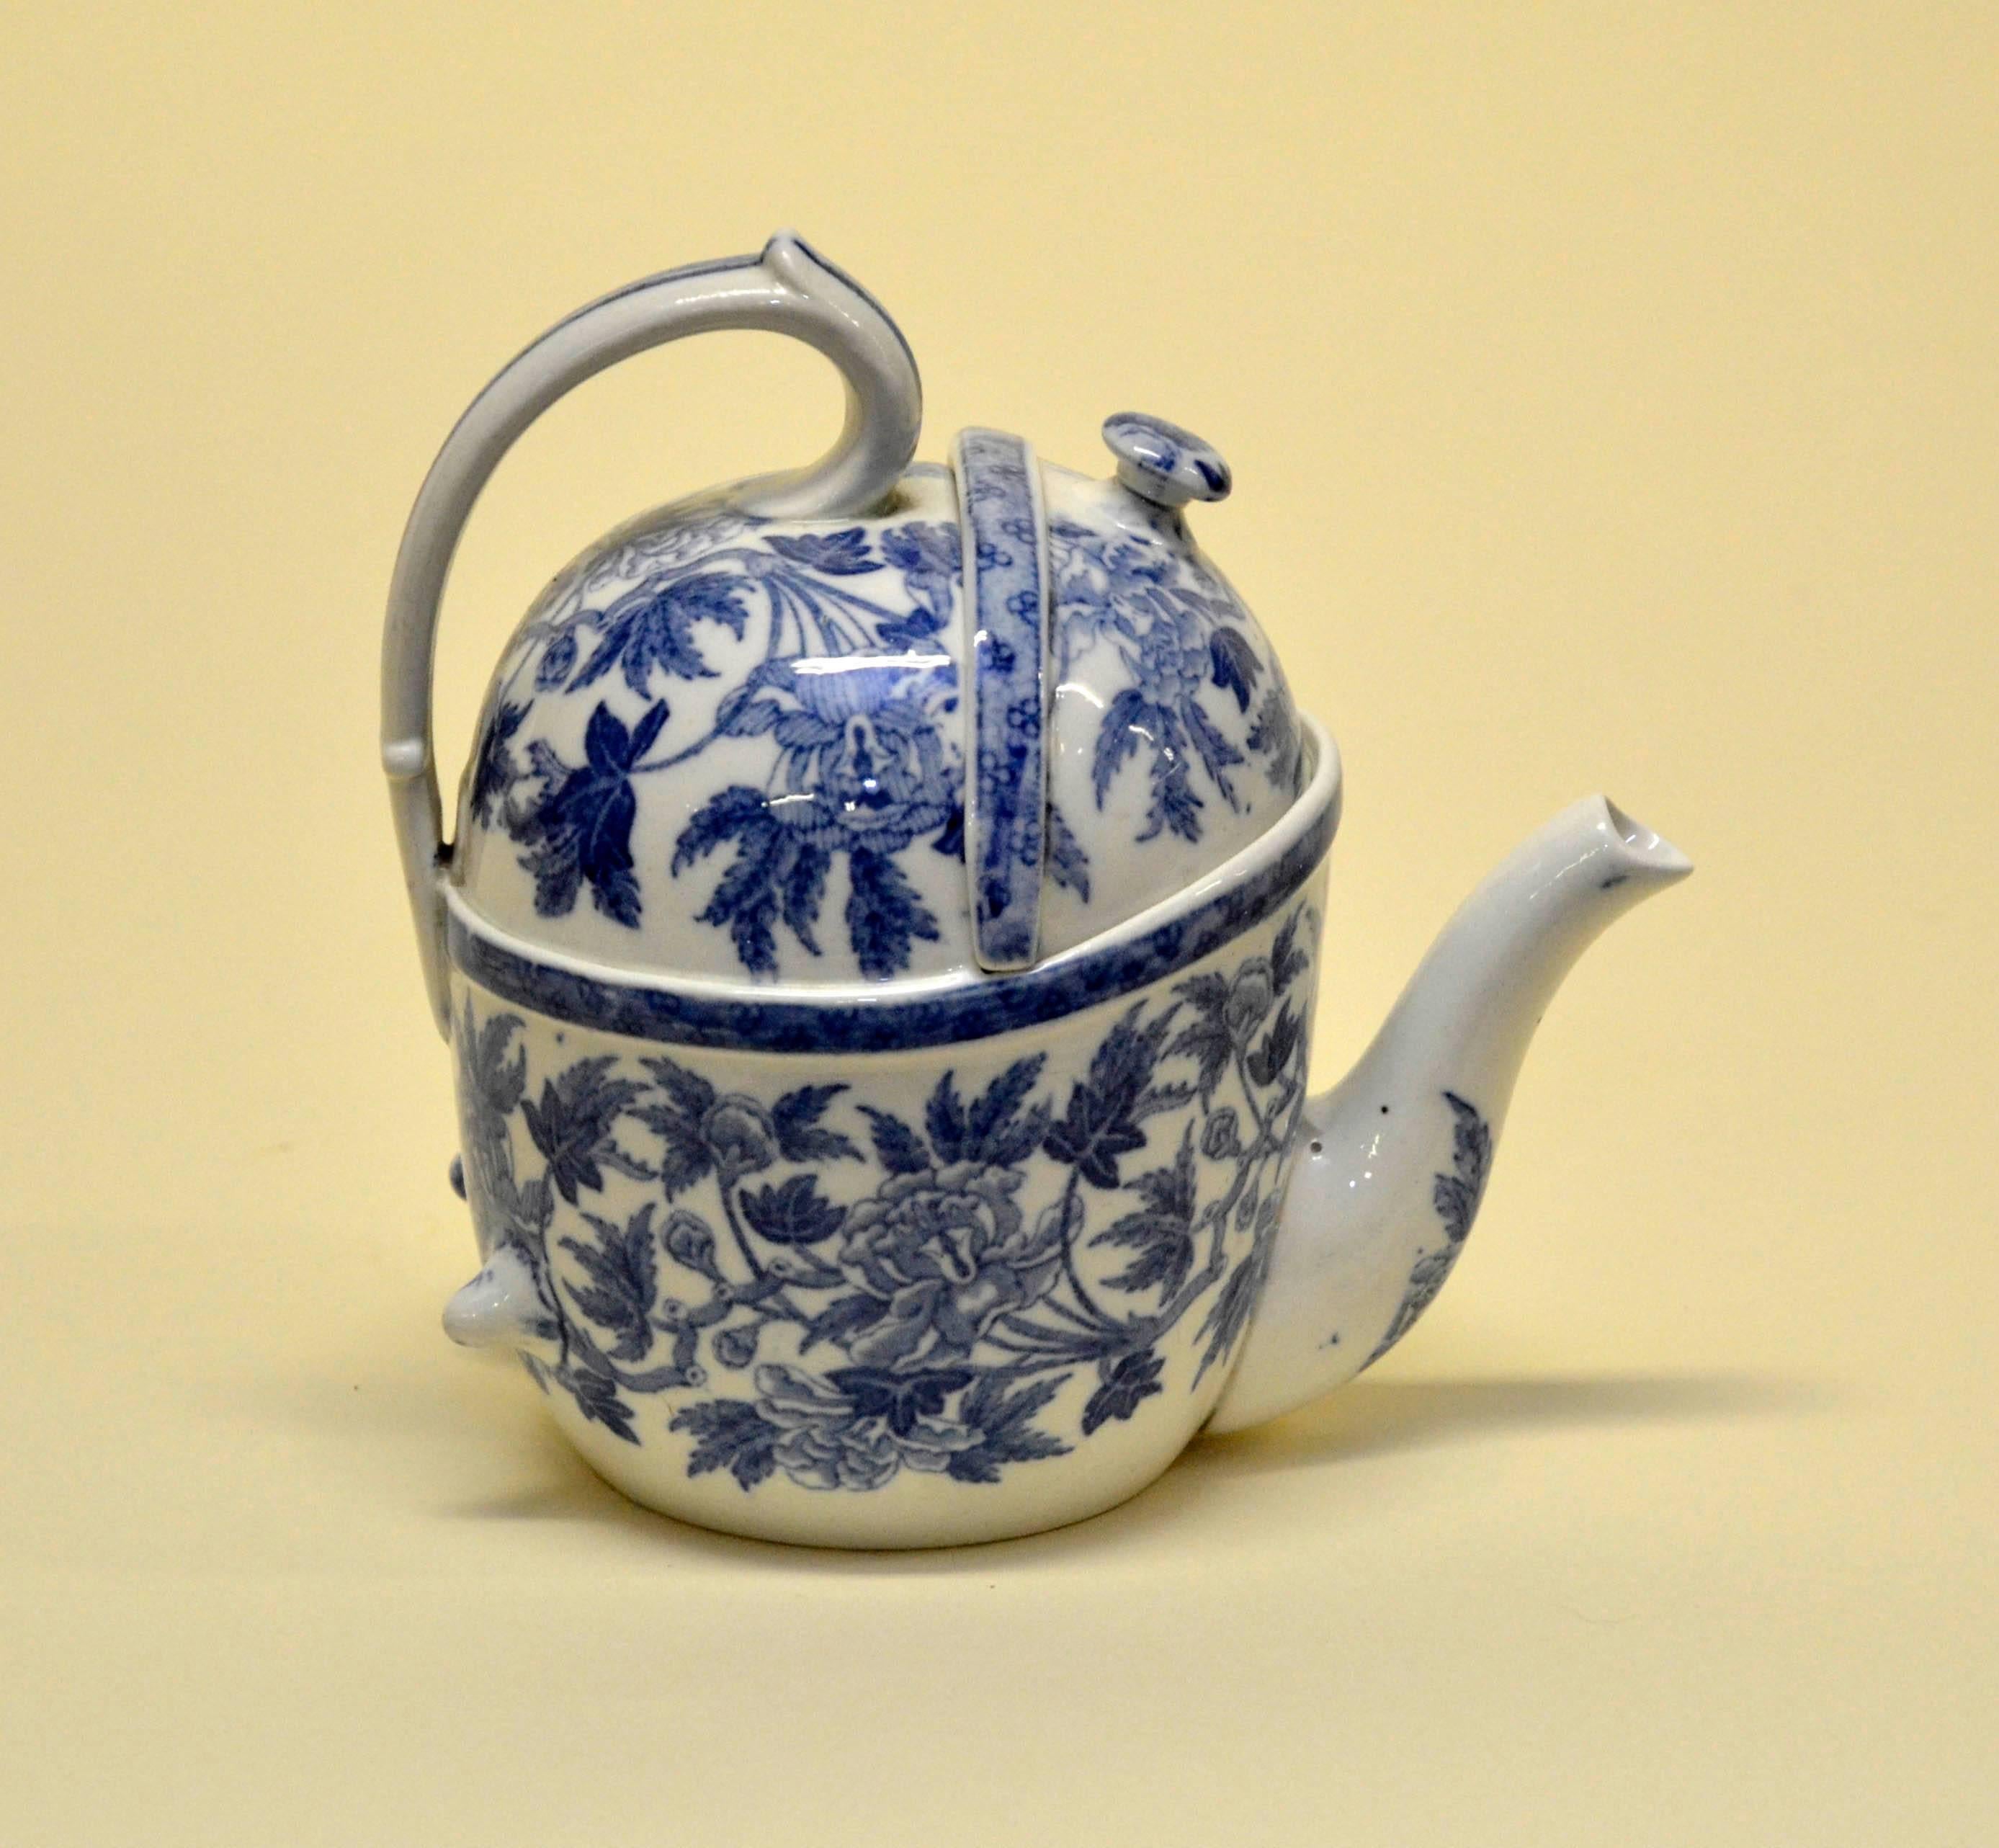 Rare Wedgwood earthenware two positions S.YP. Simple Yet Perfect patent teapot and lid in pristine condition, not restored and ready to be used to brew two tea cups.
On base: in blue a garland that crosses the entire base: 